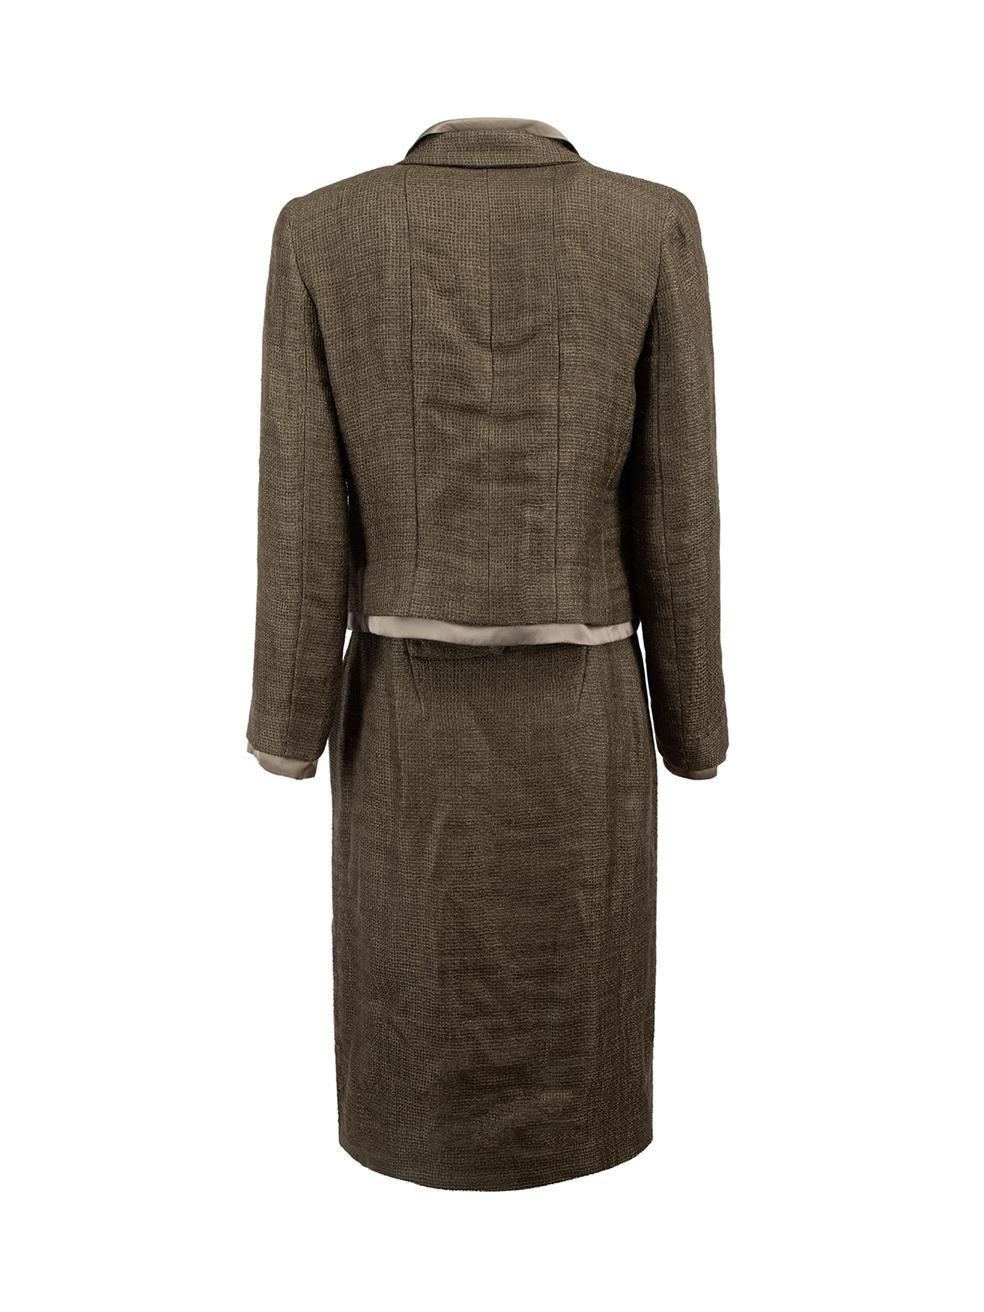 Black Chanel Green Mohair Woven Skirt Suit Size M